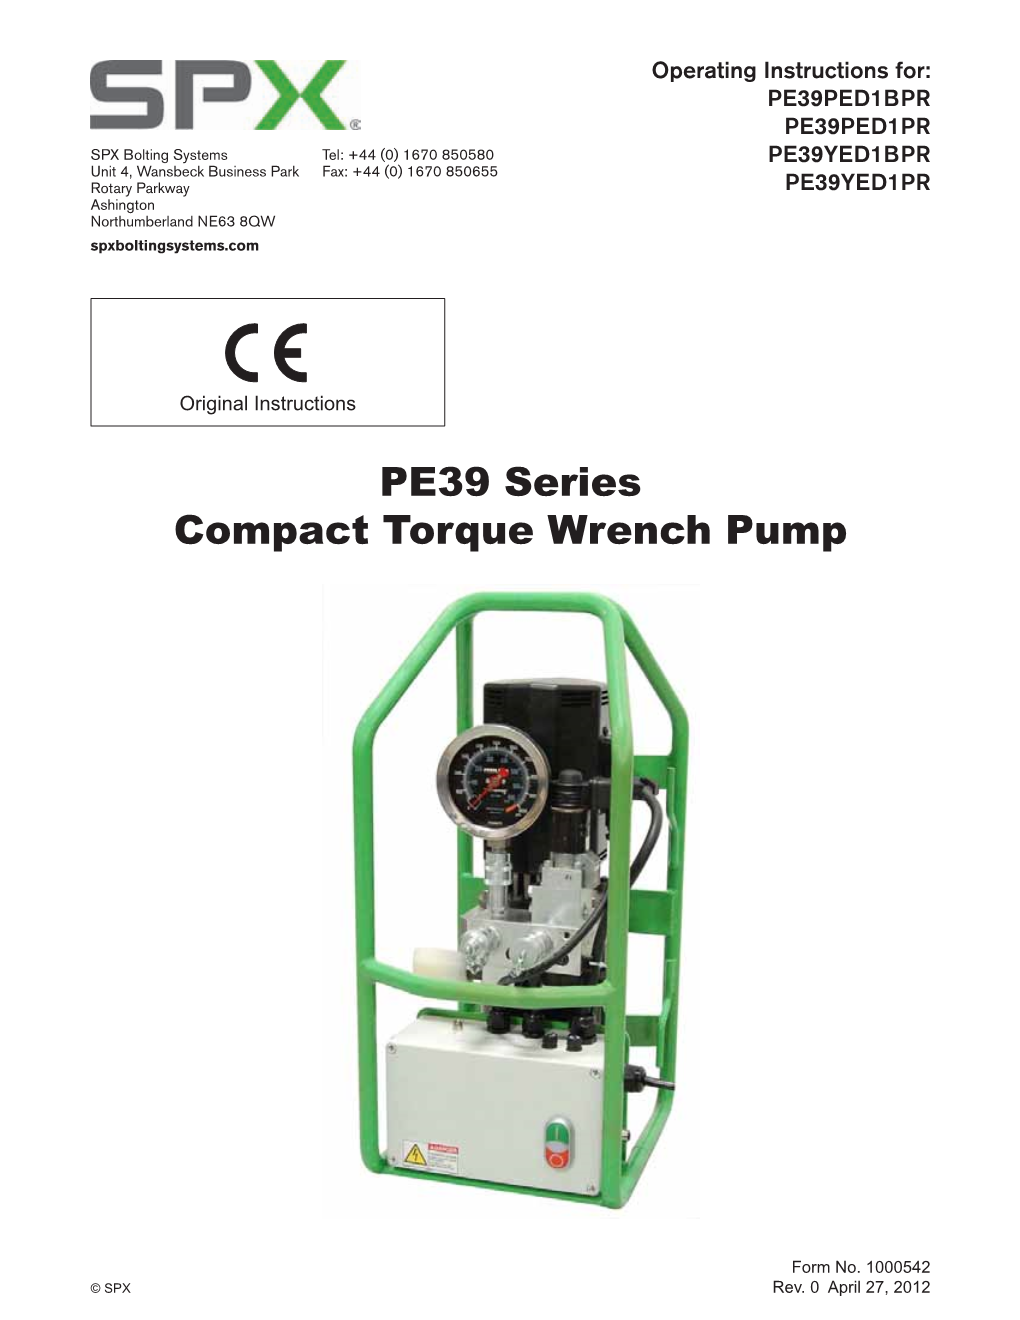 PE39 Series Compact Torque Wrench Pump